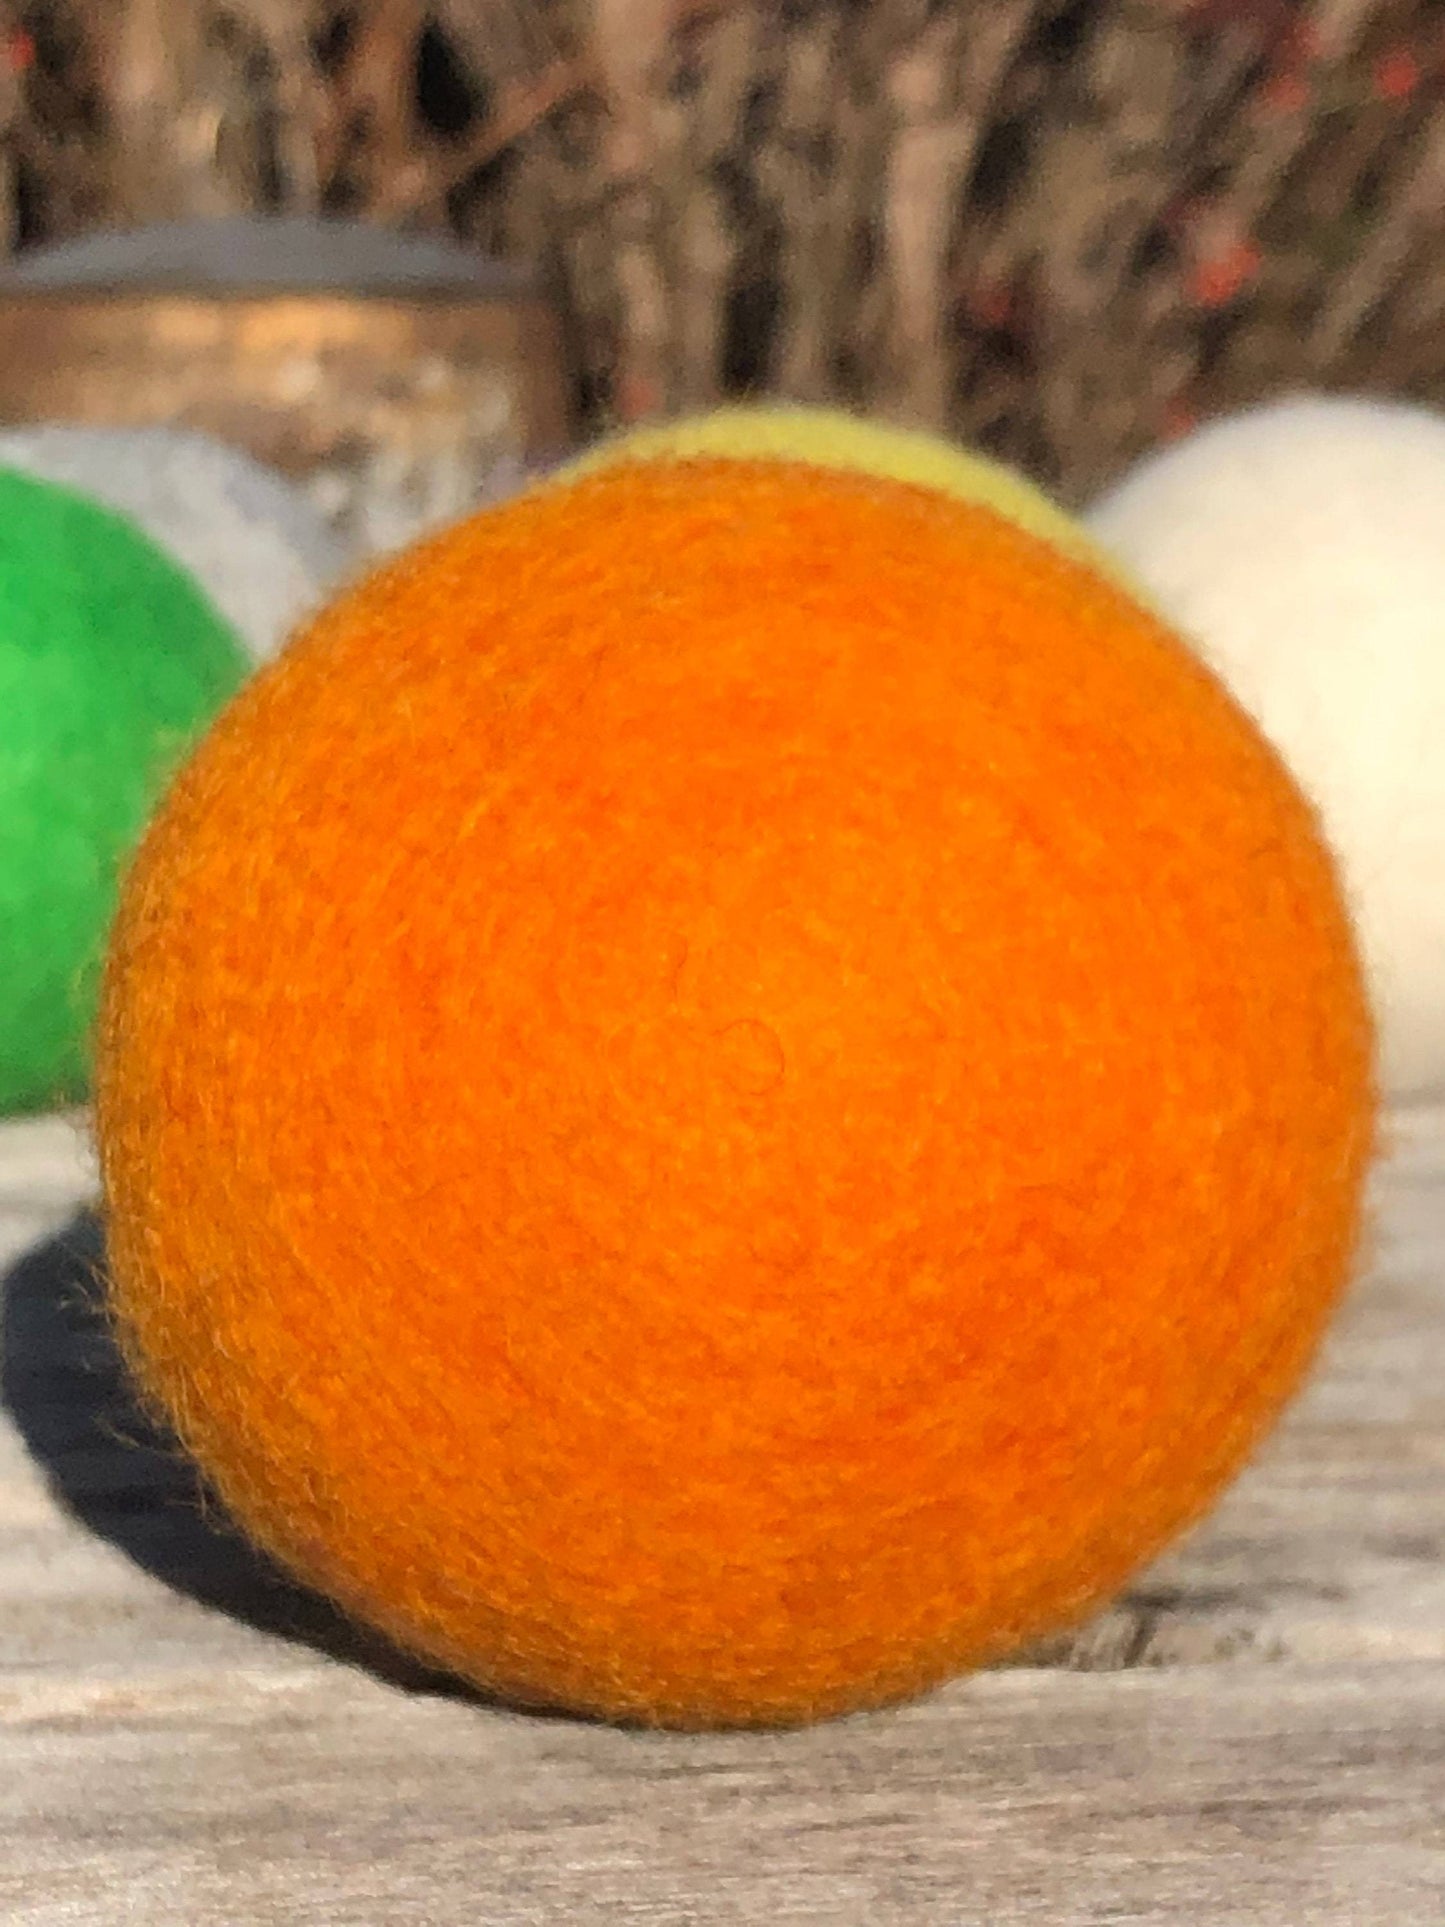 Wool Dryer Balls  XL Natural Laundry Softener,  Natural Eco Friendly with no chemicals - XL - Organic & Baby Safe